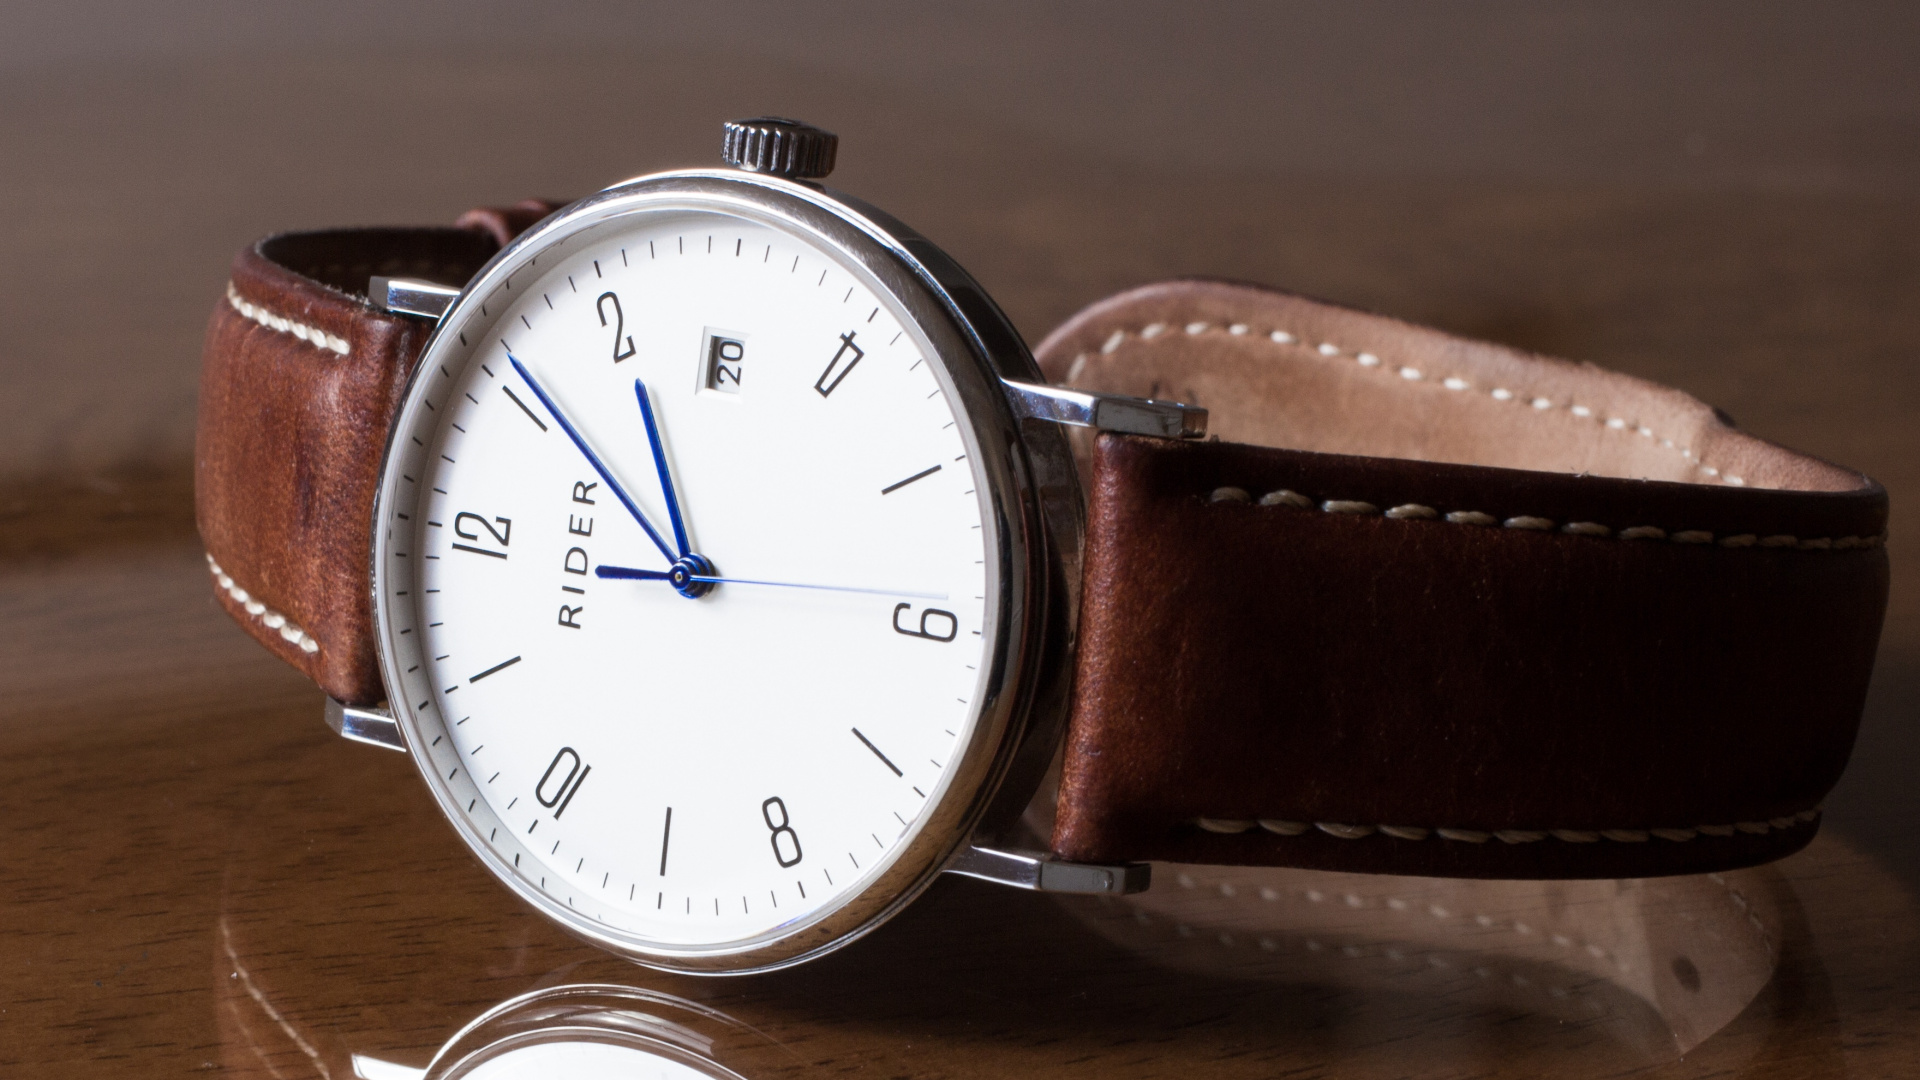 Brown Leather Strap Silver Round Analog Watch. Wallpaper in 1920x1080 Resolution